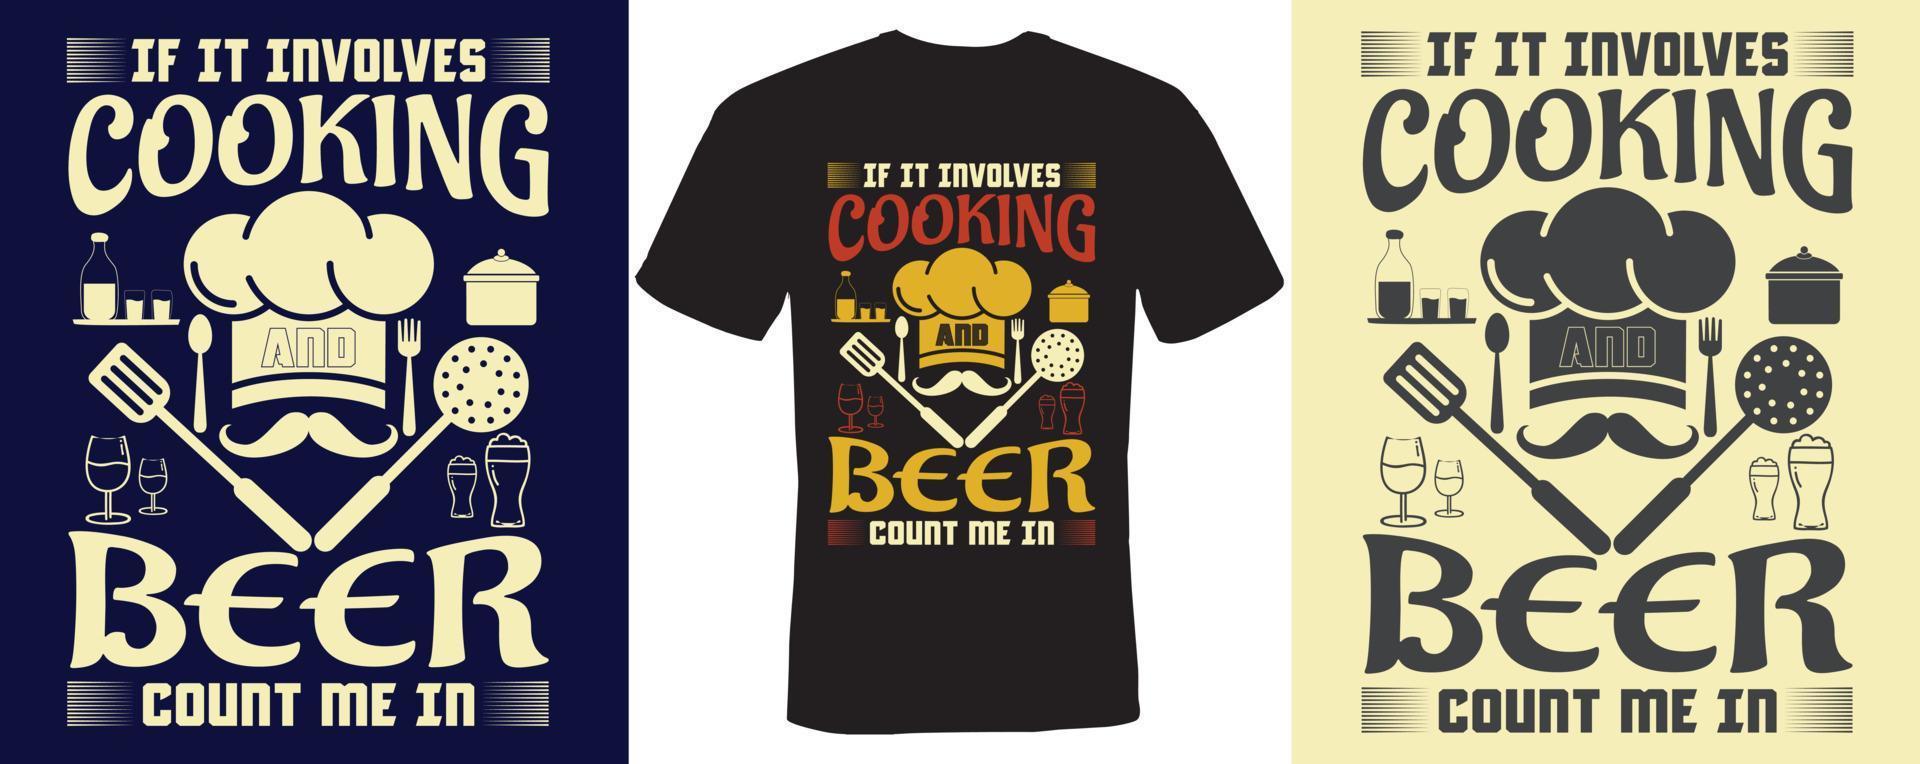 If it involves cooking and beer count me in T-shirt Design for cooking vector